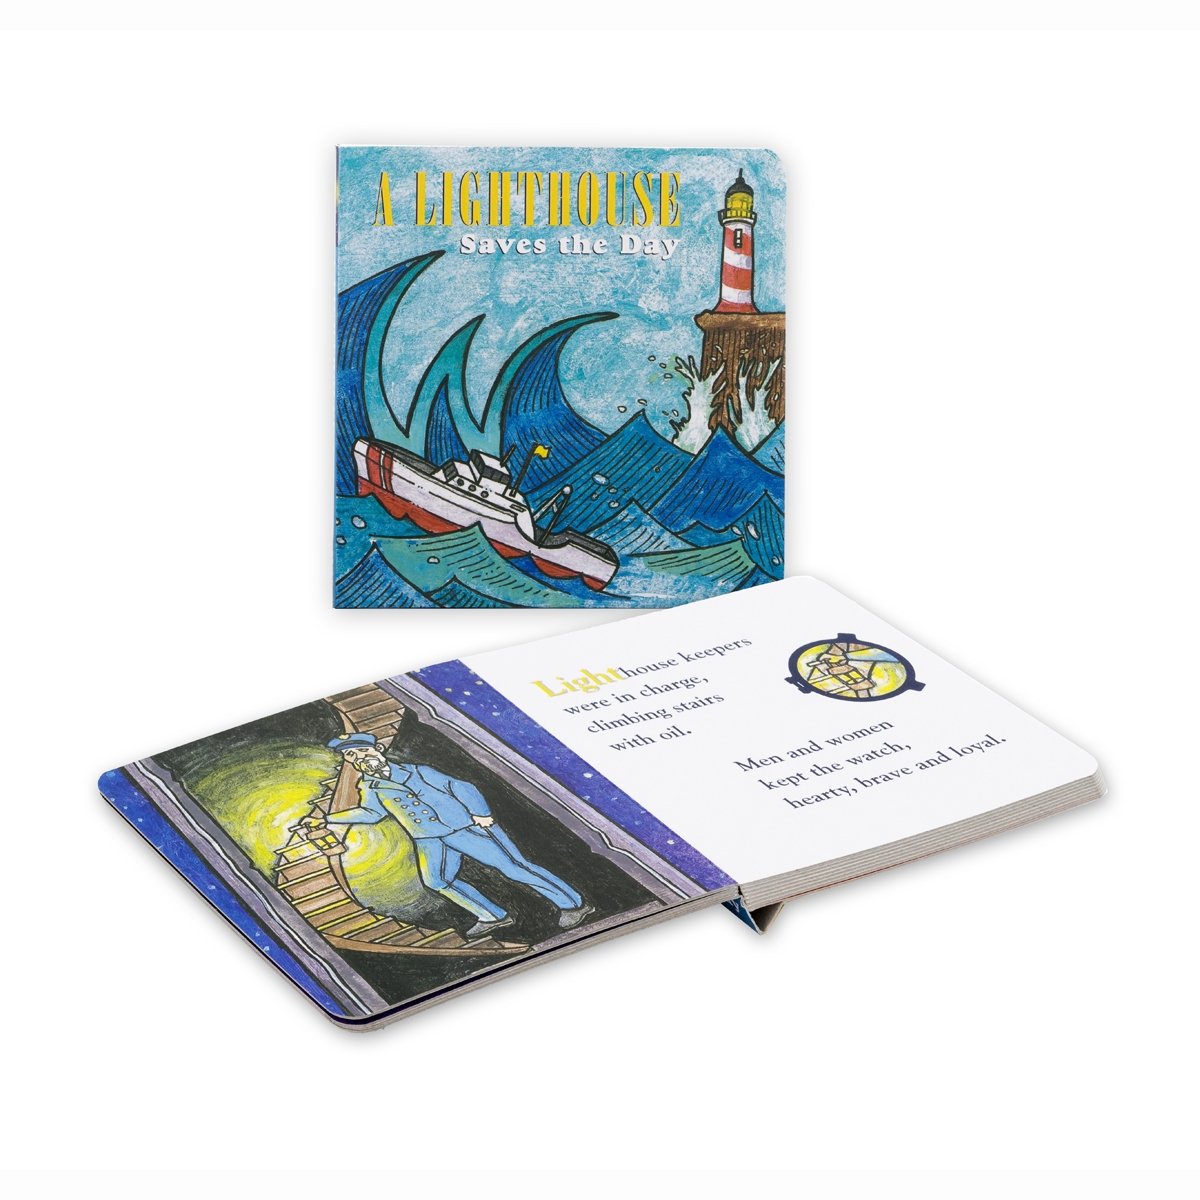 Lighthouse Saves the Day board book with poem by Robert Lieber.